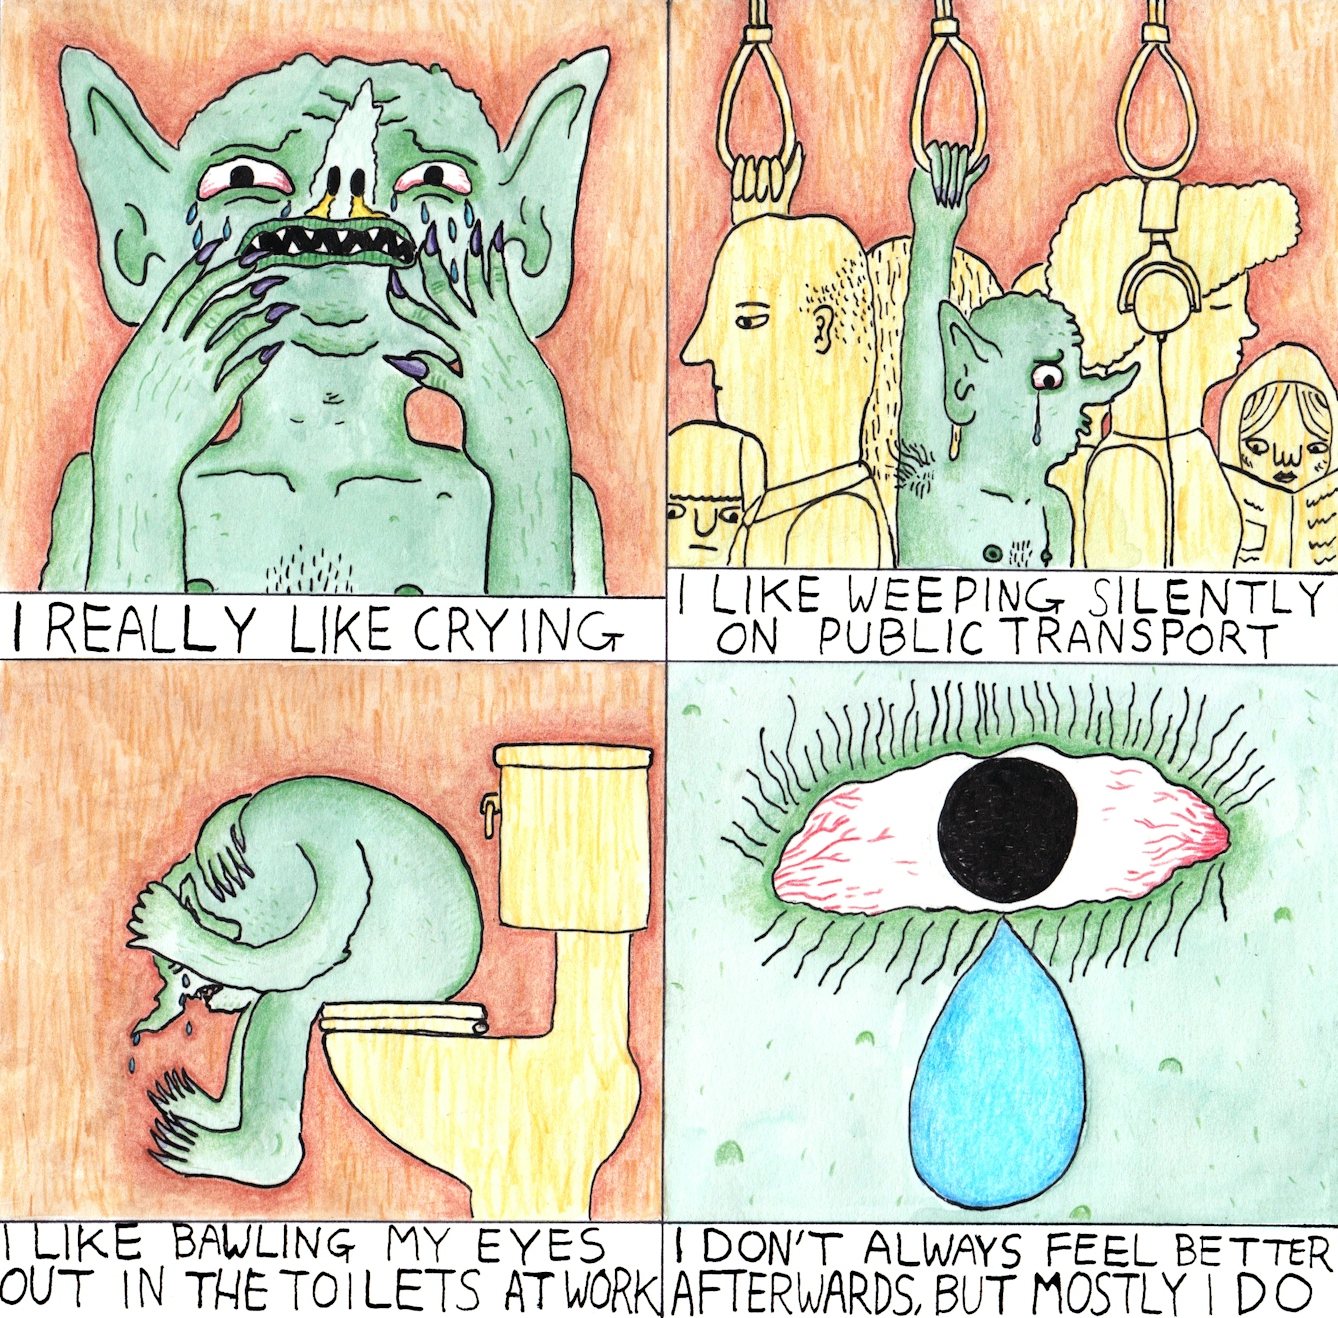 Comic about crying and how it can feel cathartic sometimes.